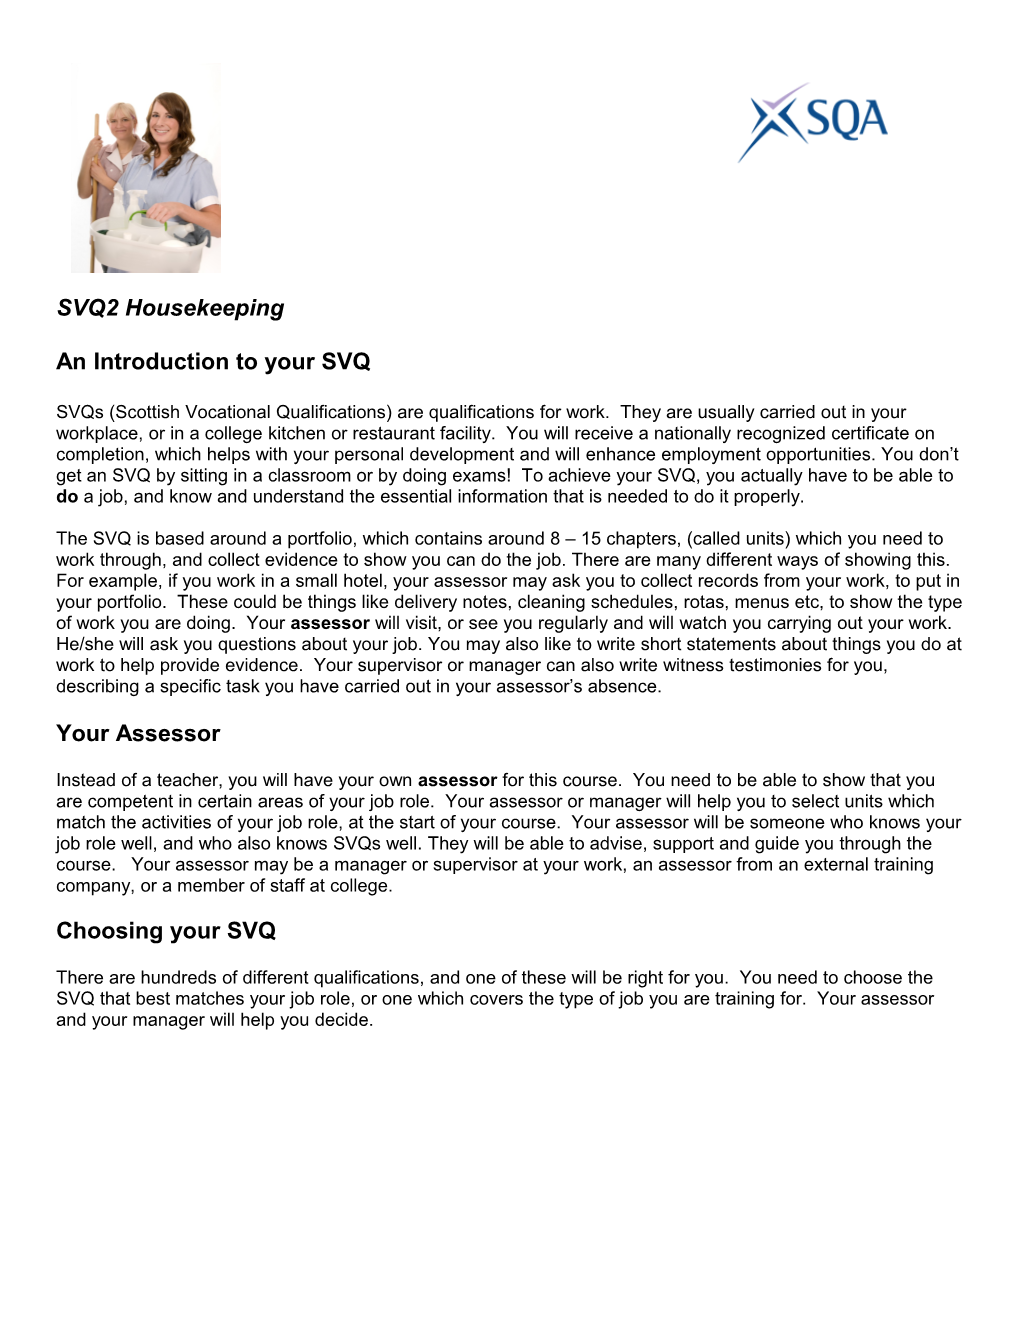 An Introduction to Your SVQ